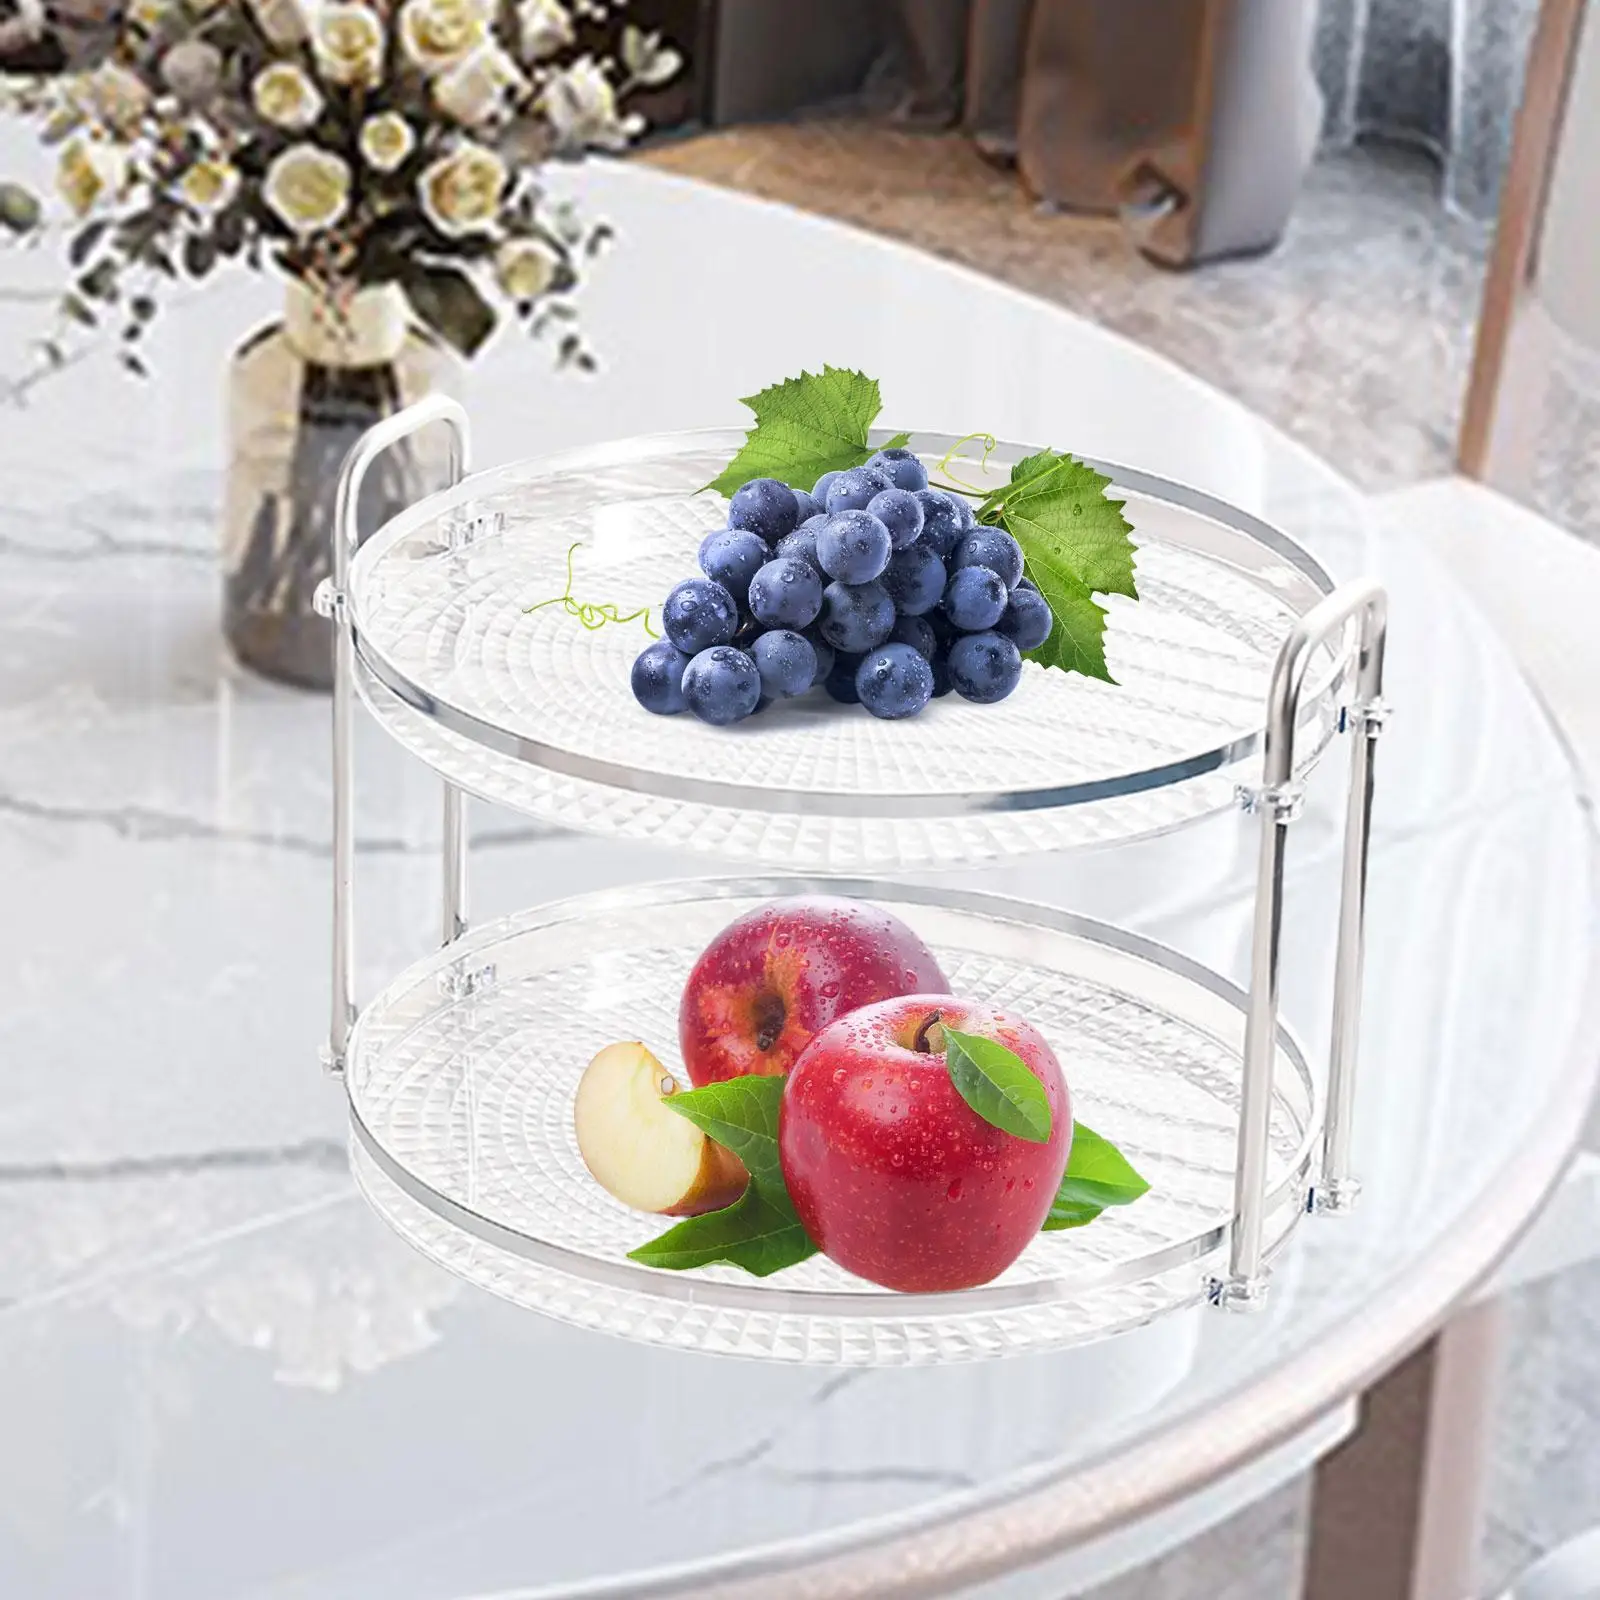 Serving Plate Organizer Specialty Plates Dessert Fruits Serving Tray for Housewarming Gift Parties Tabletop Desktop Dining Room